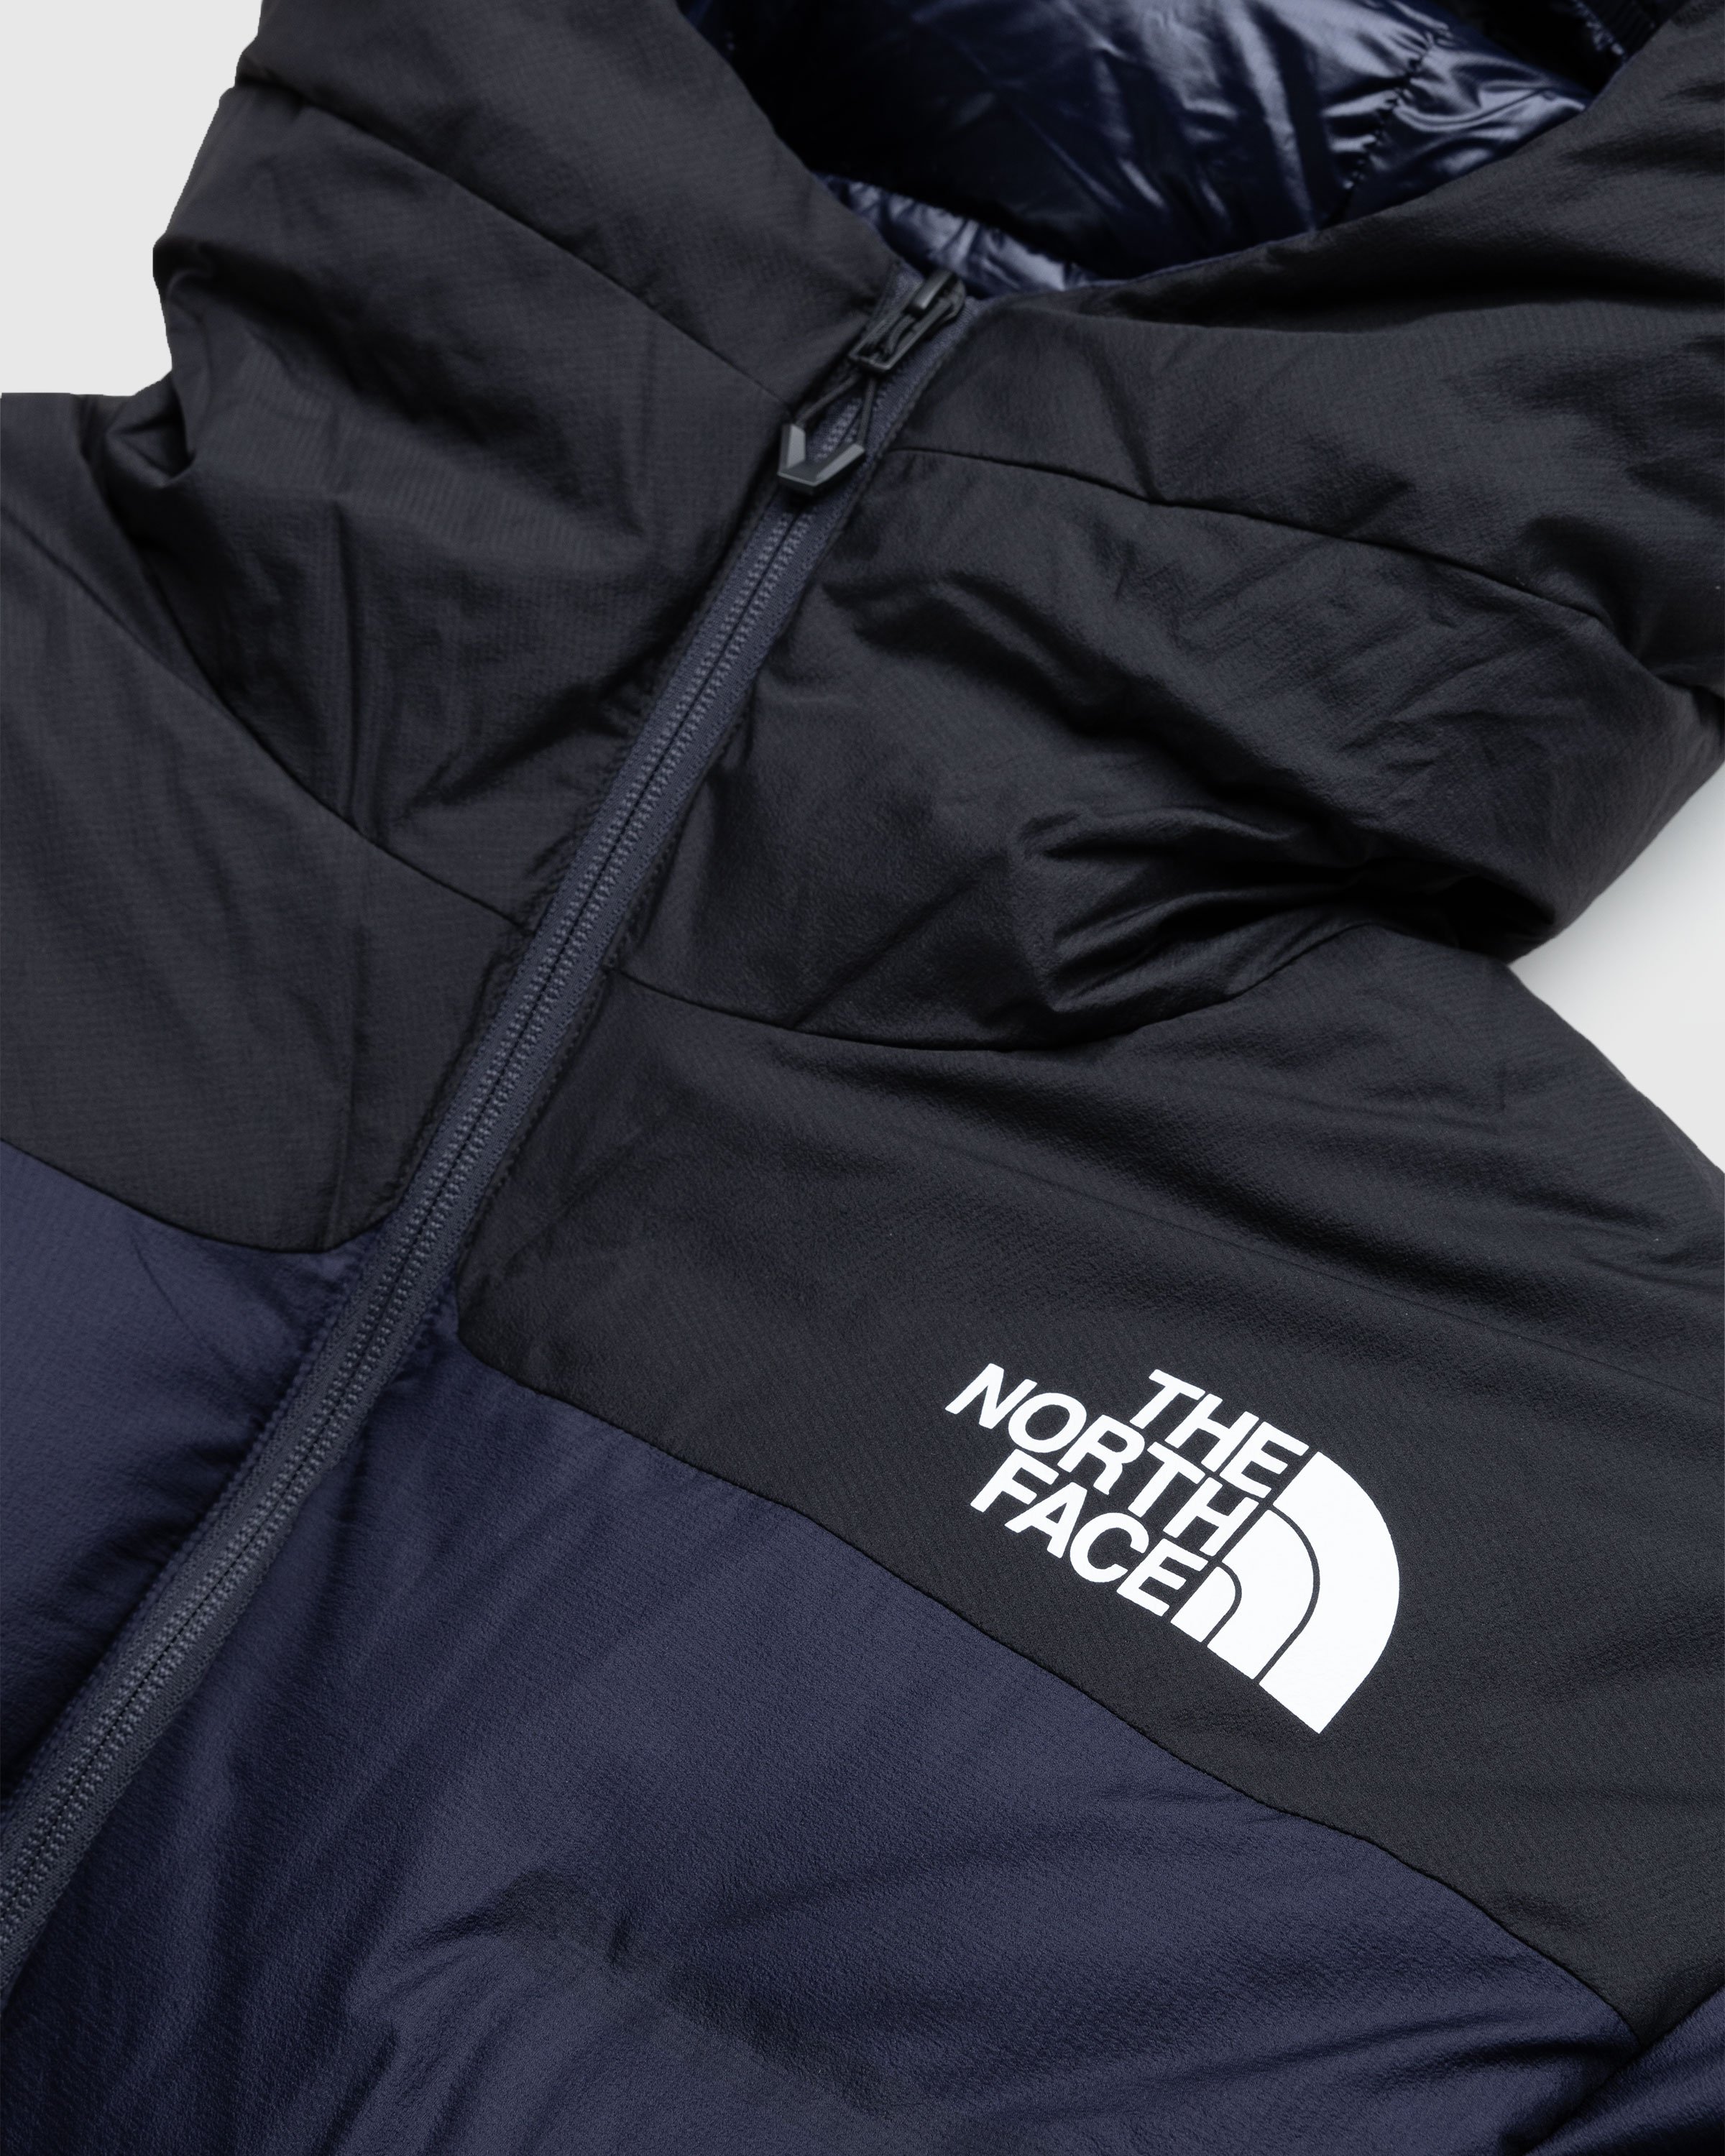 The North Face x UNDERCOVER - Soukuu Cloud Down Nupste Parka Black/Navy - Clothing - Multi - Image 7